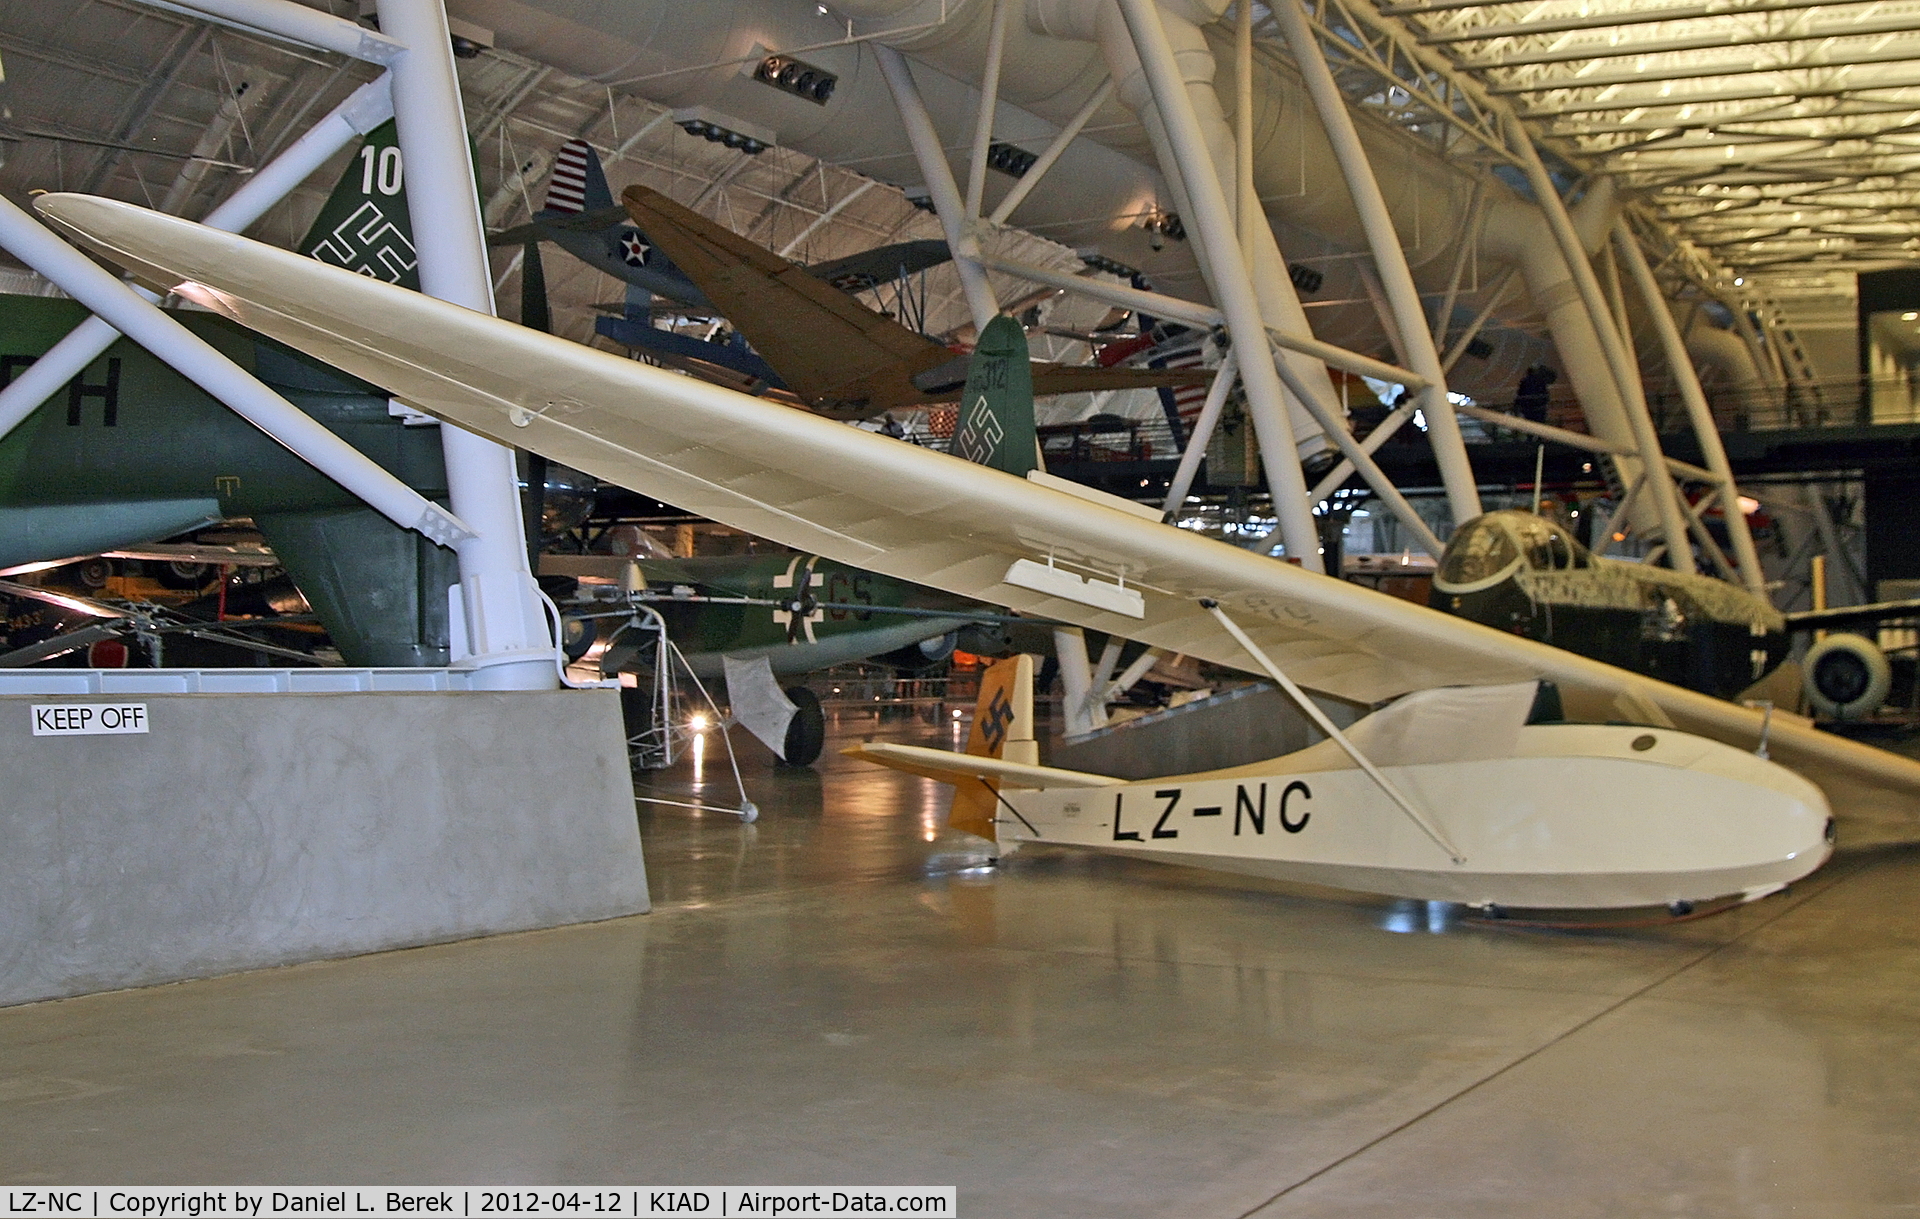 LZ-NC, 1944 Schneider Grunau Baby IIb-2 C/N 031.016, Great to see an example of this classic aircraft on display!